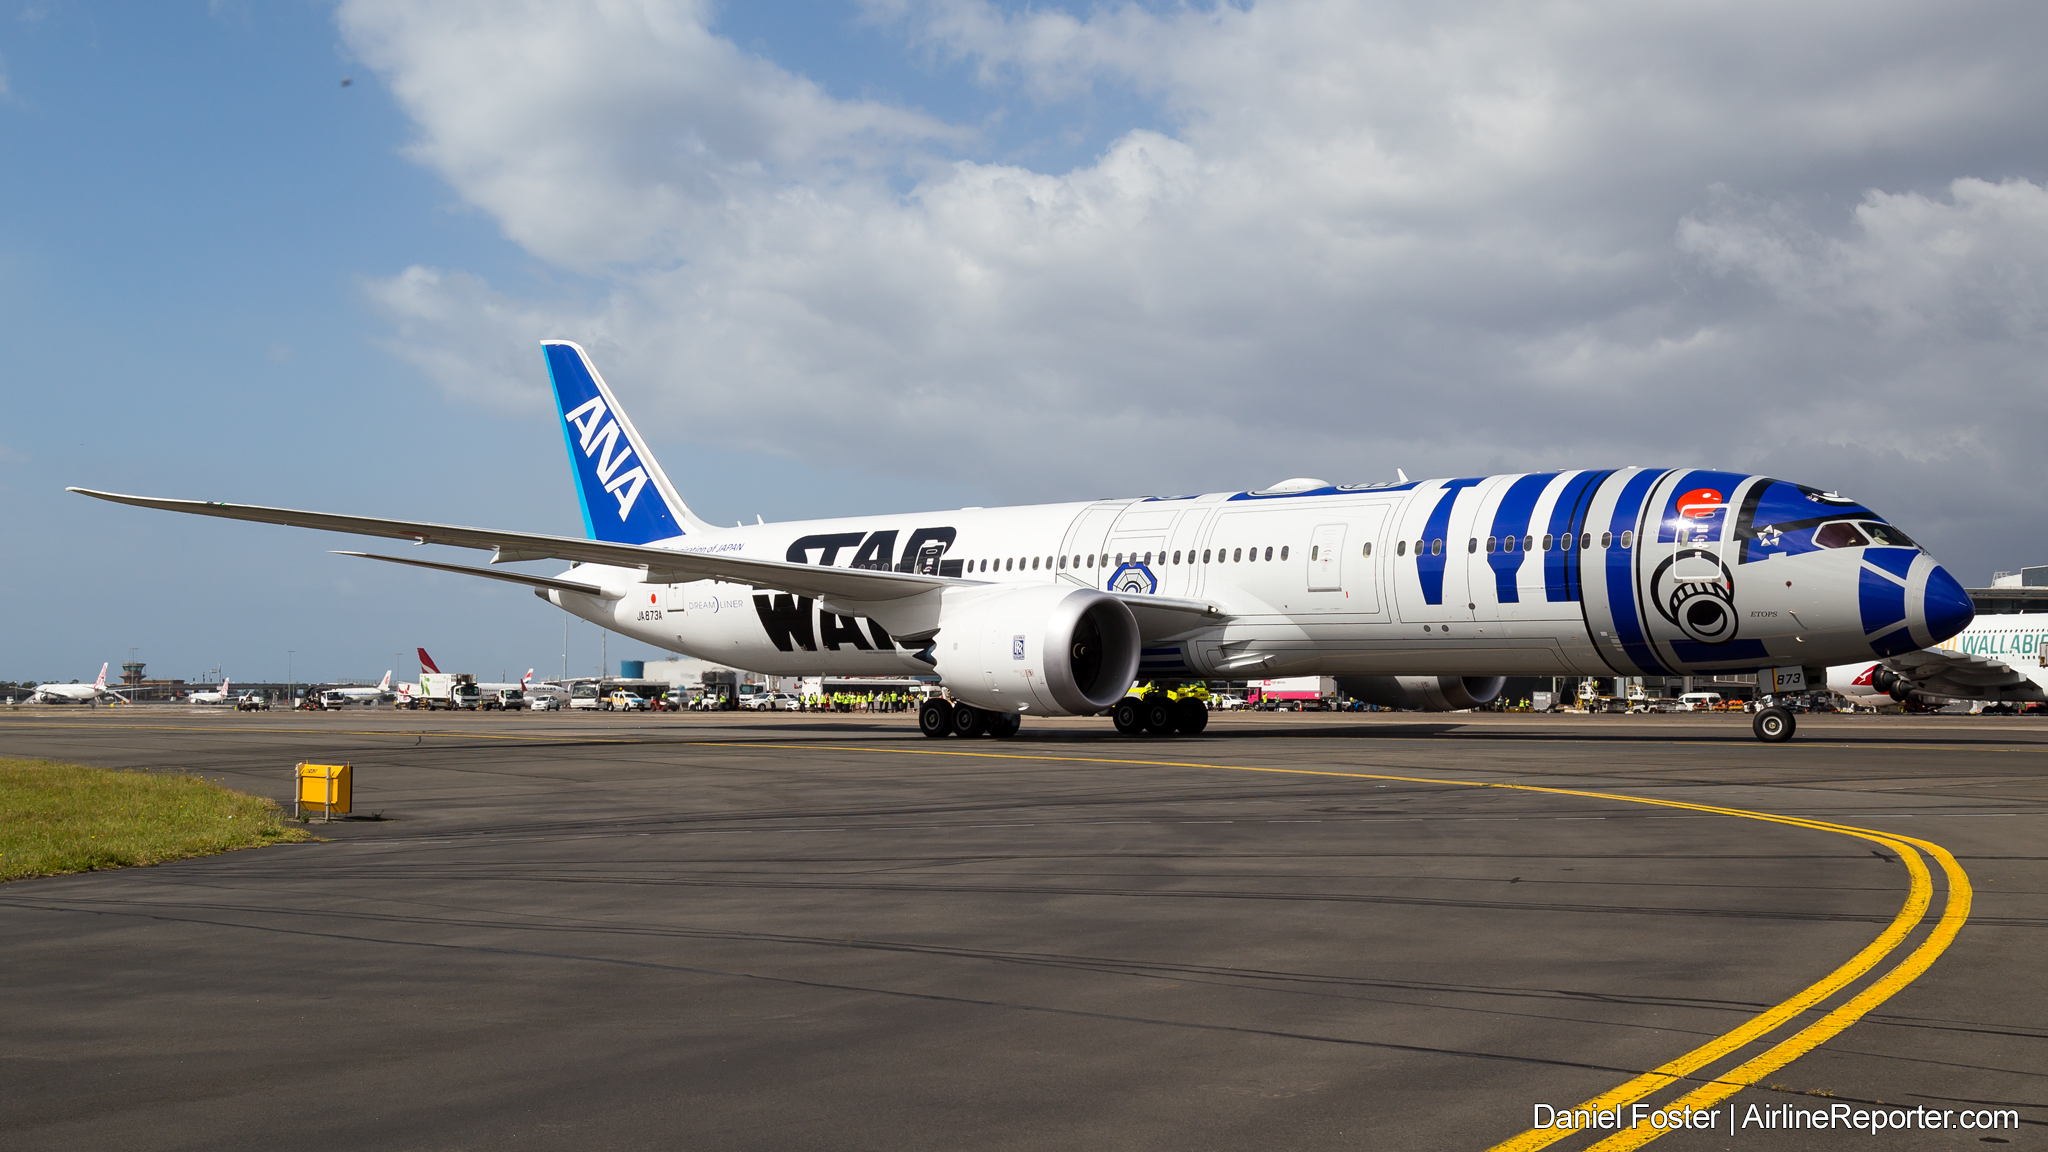 ANA Returns to Sydney in Style with the R2-D2 Star Wars Dreamliner